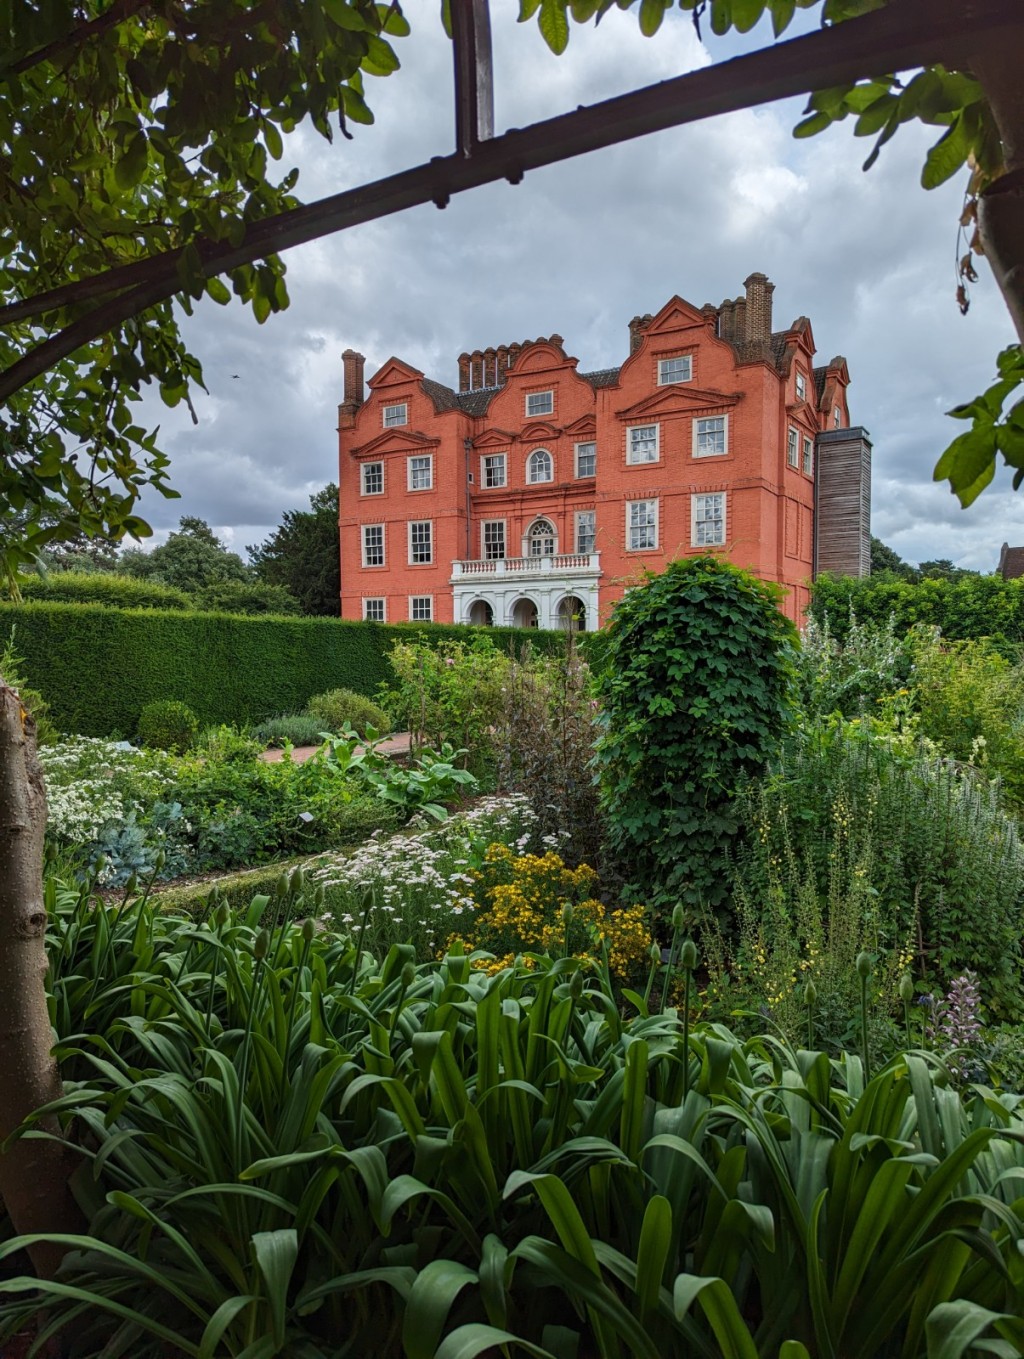 The fabulous Kew Palace and the true story of Bridgerton’s Queen Charlotte